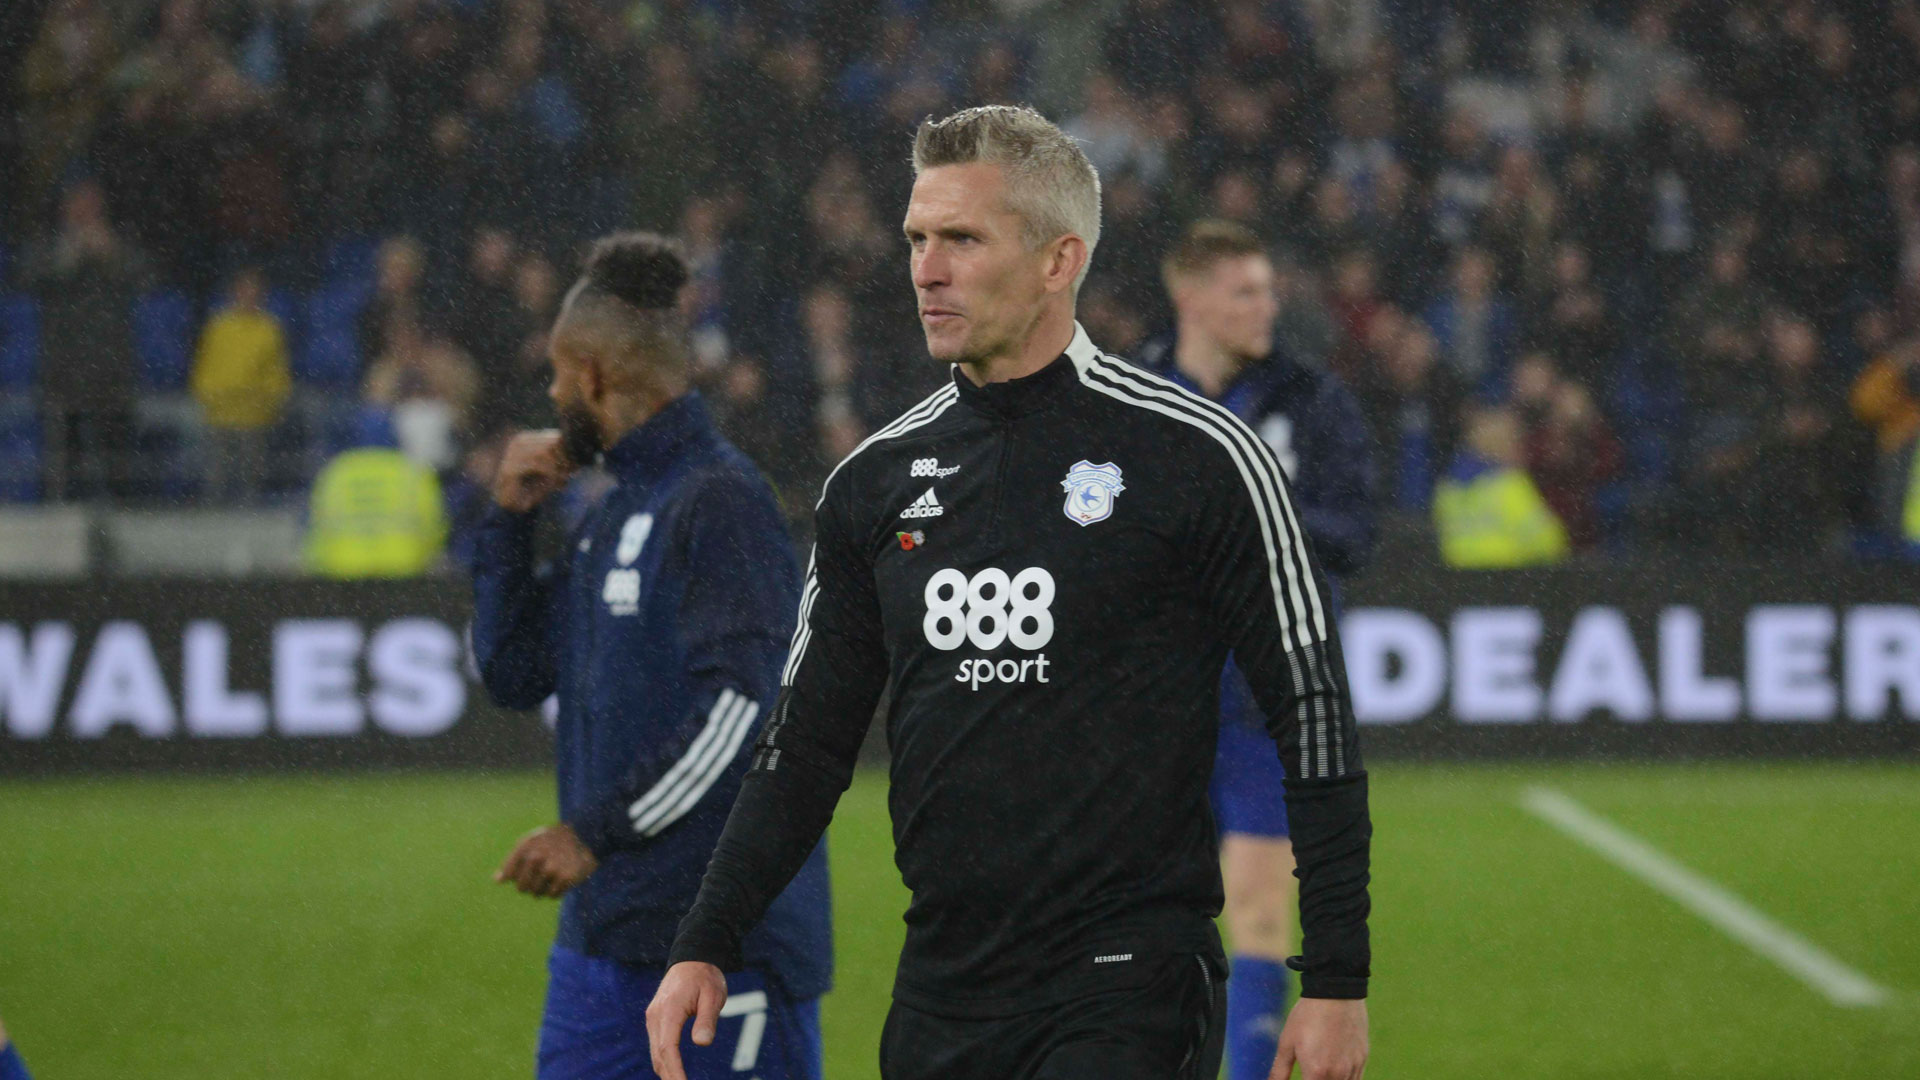 Steve Morison after the win against Huddersfield Town...